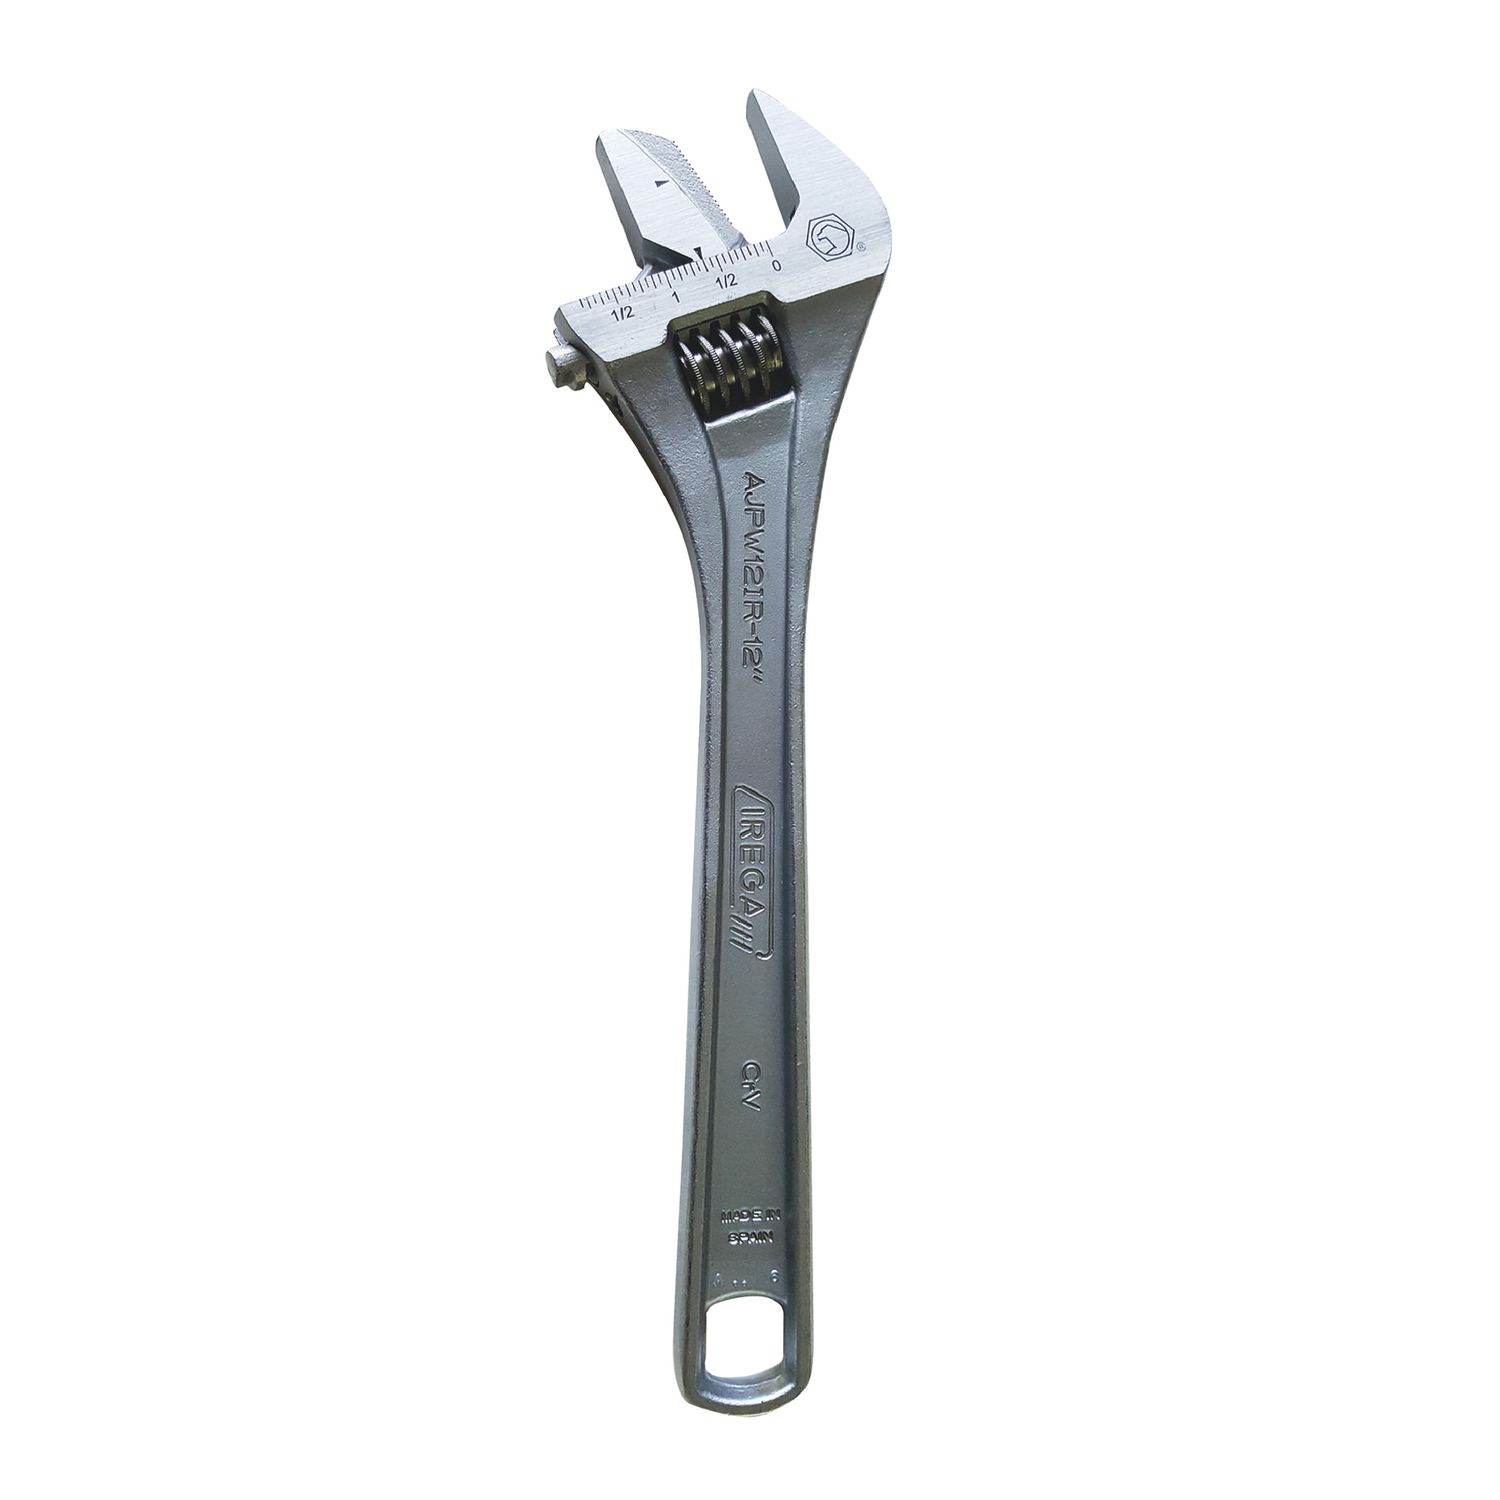 12-inch Reversible Jaw Adjustable Wrench